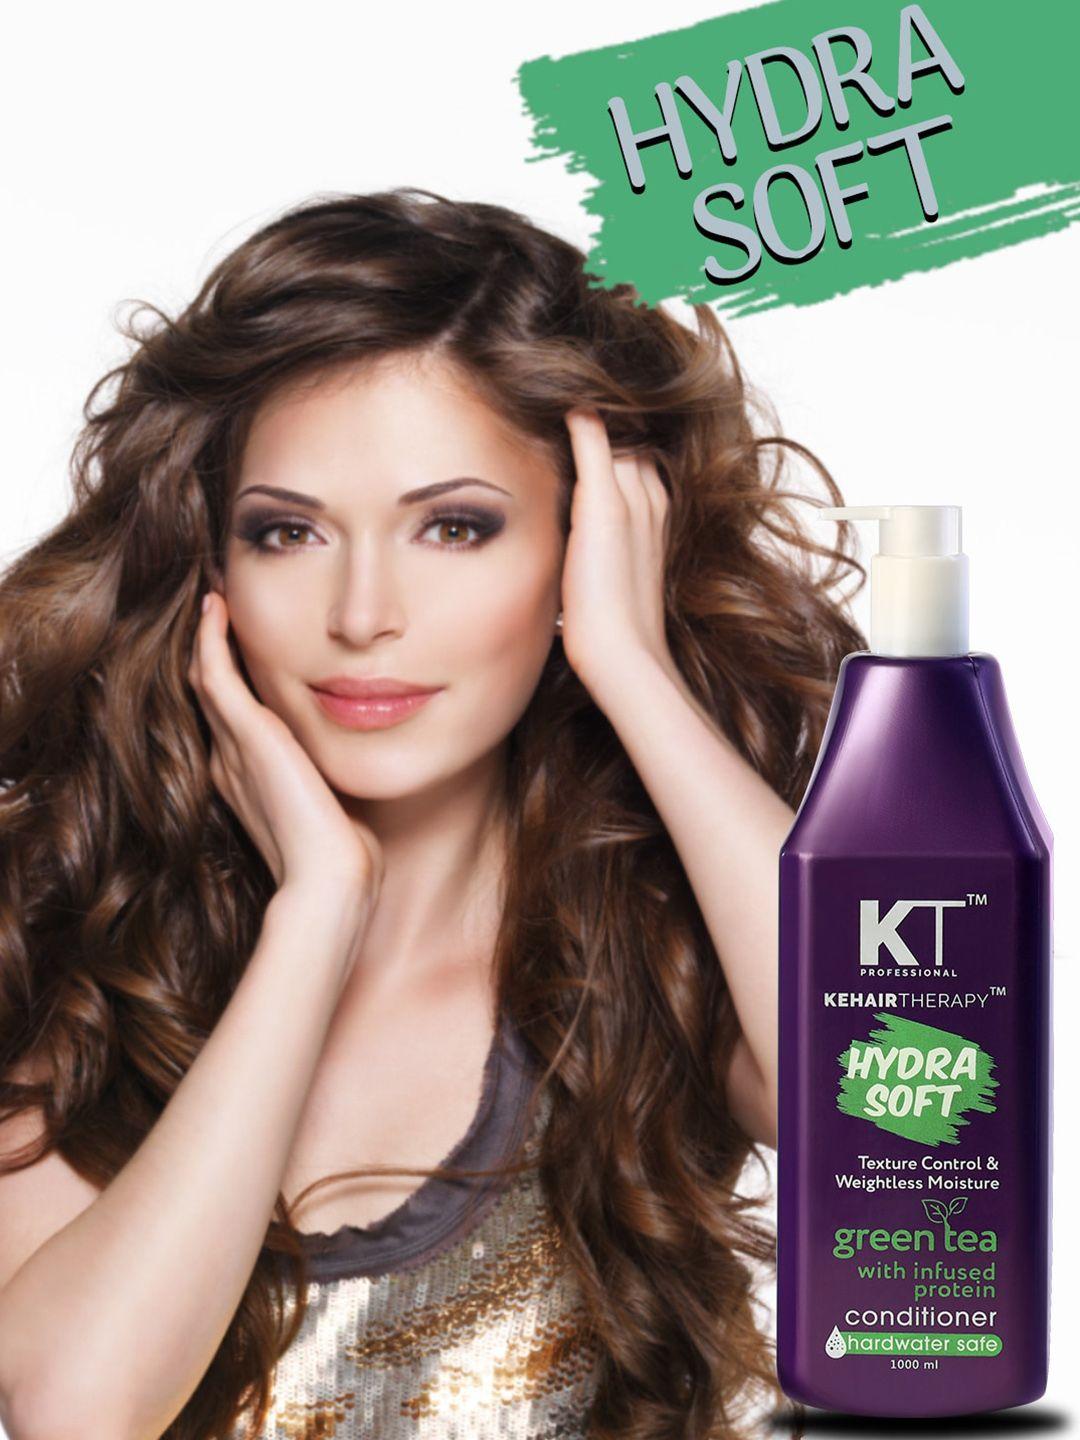 kehairtherapy hydra soft texture control conditioner with green tea - 1000ml